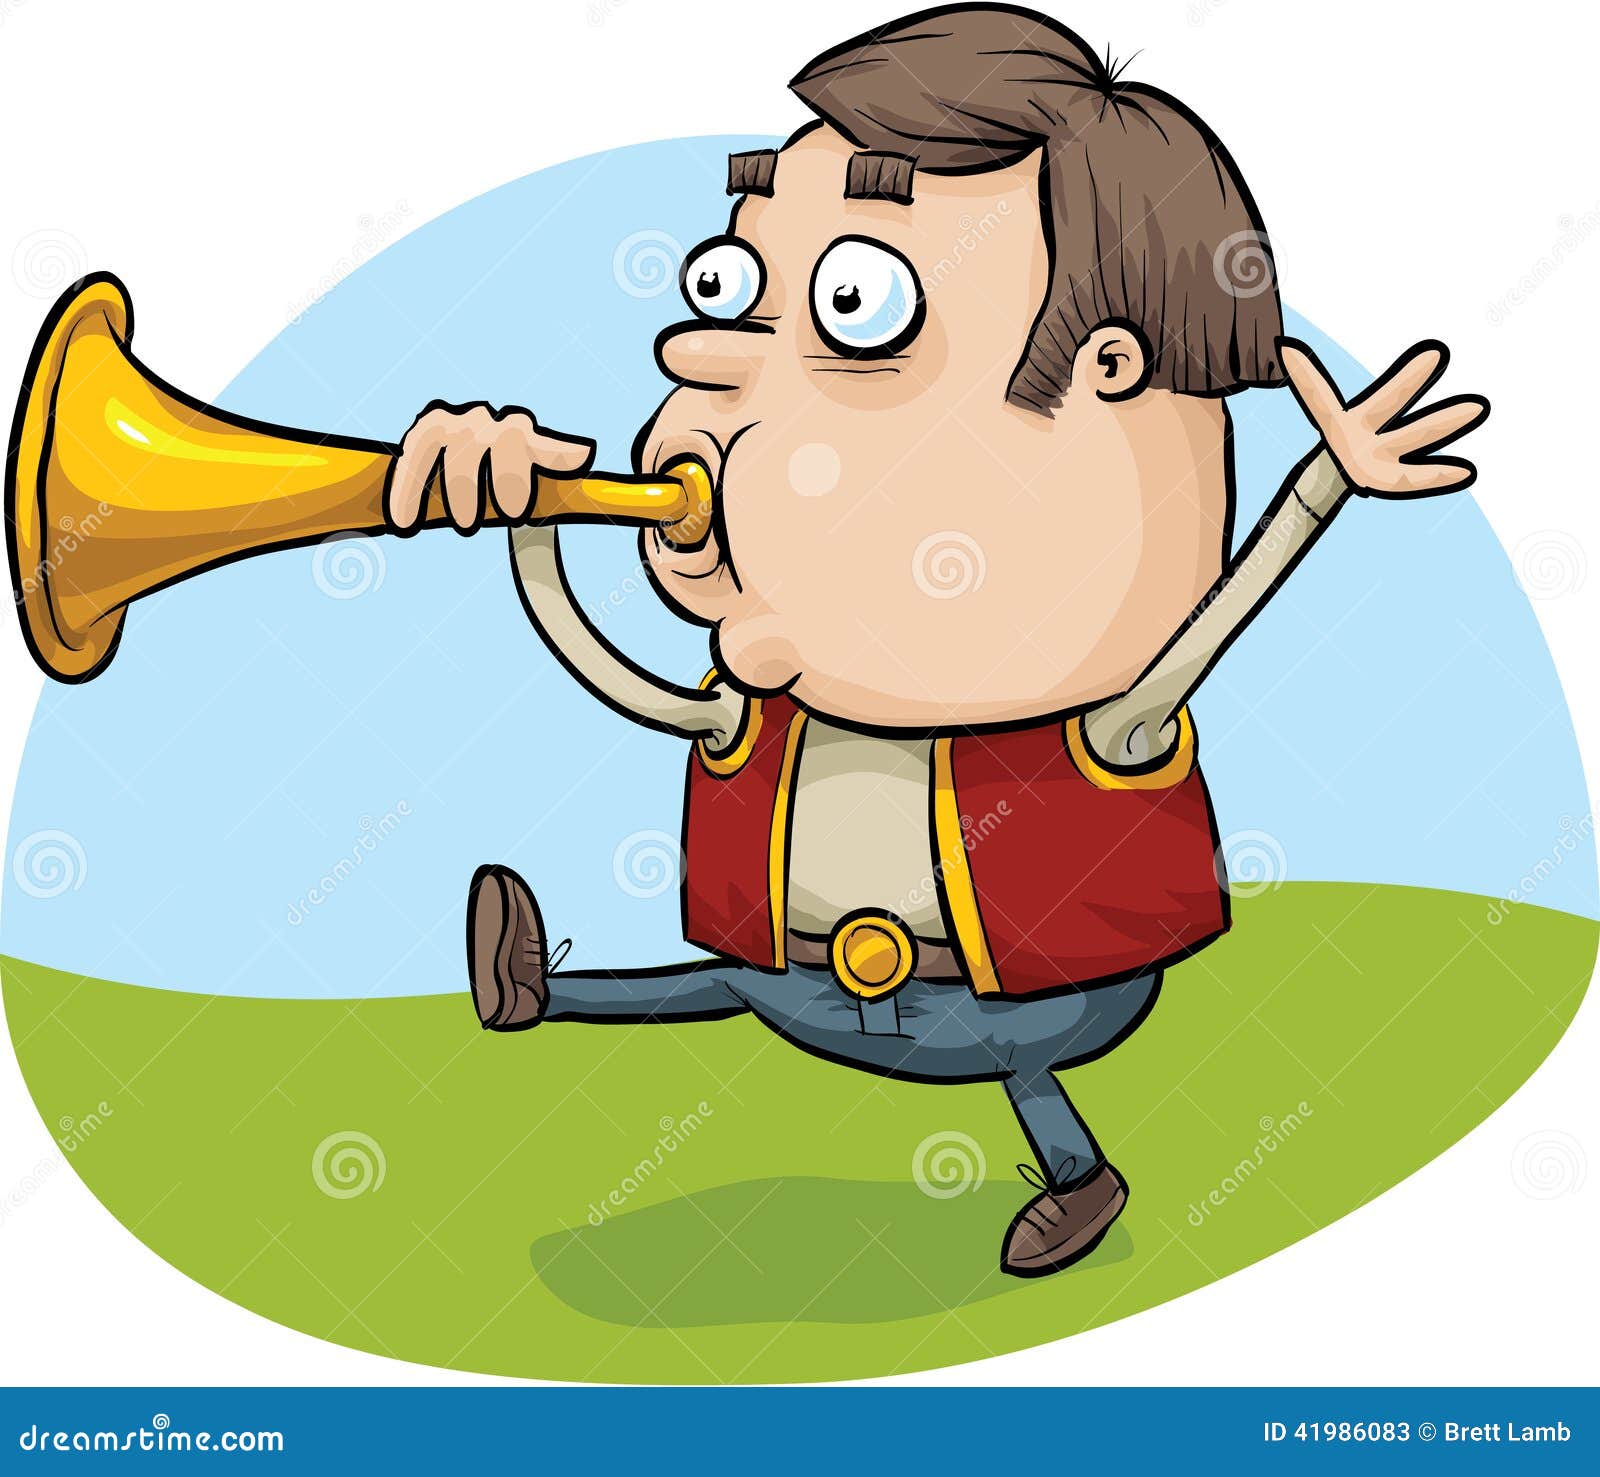 clipart man blowing horn - photo #1